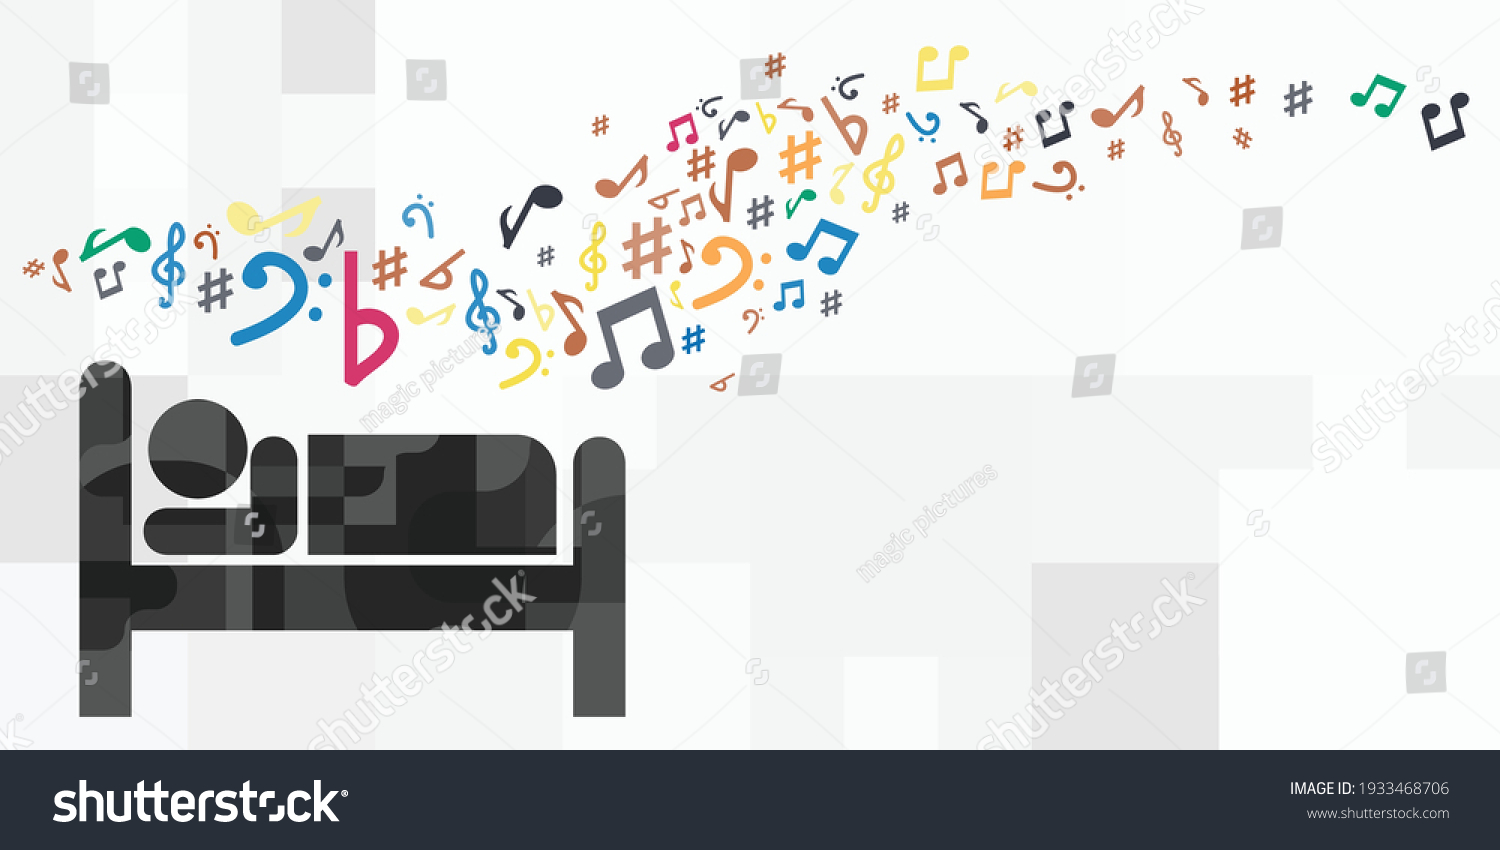 SVG of vector illustration of sleeping person and musical tranquilizing method against insomnia  svg